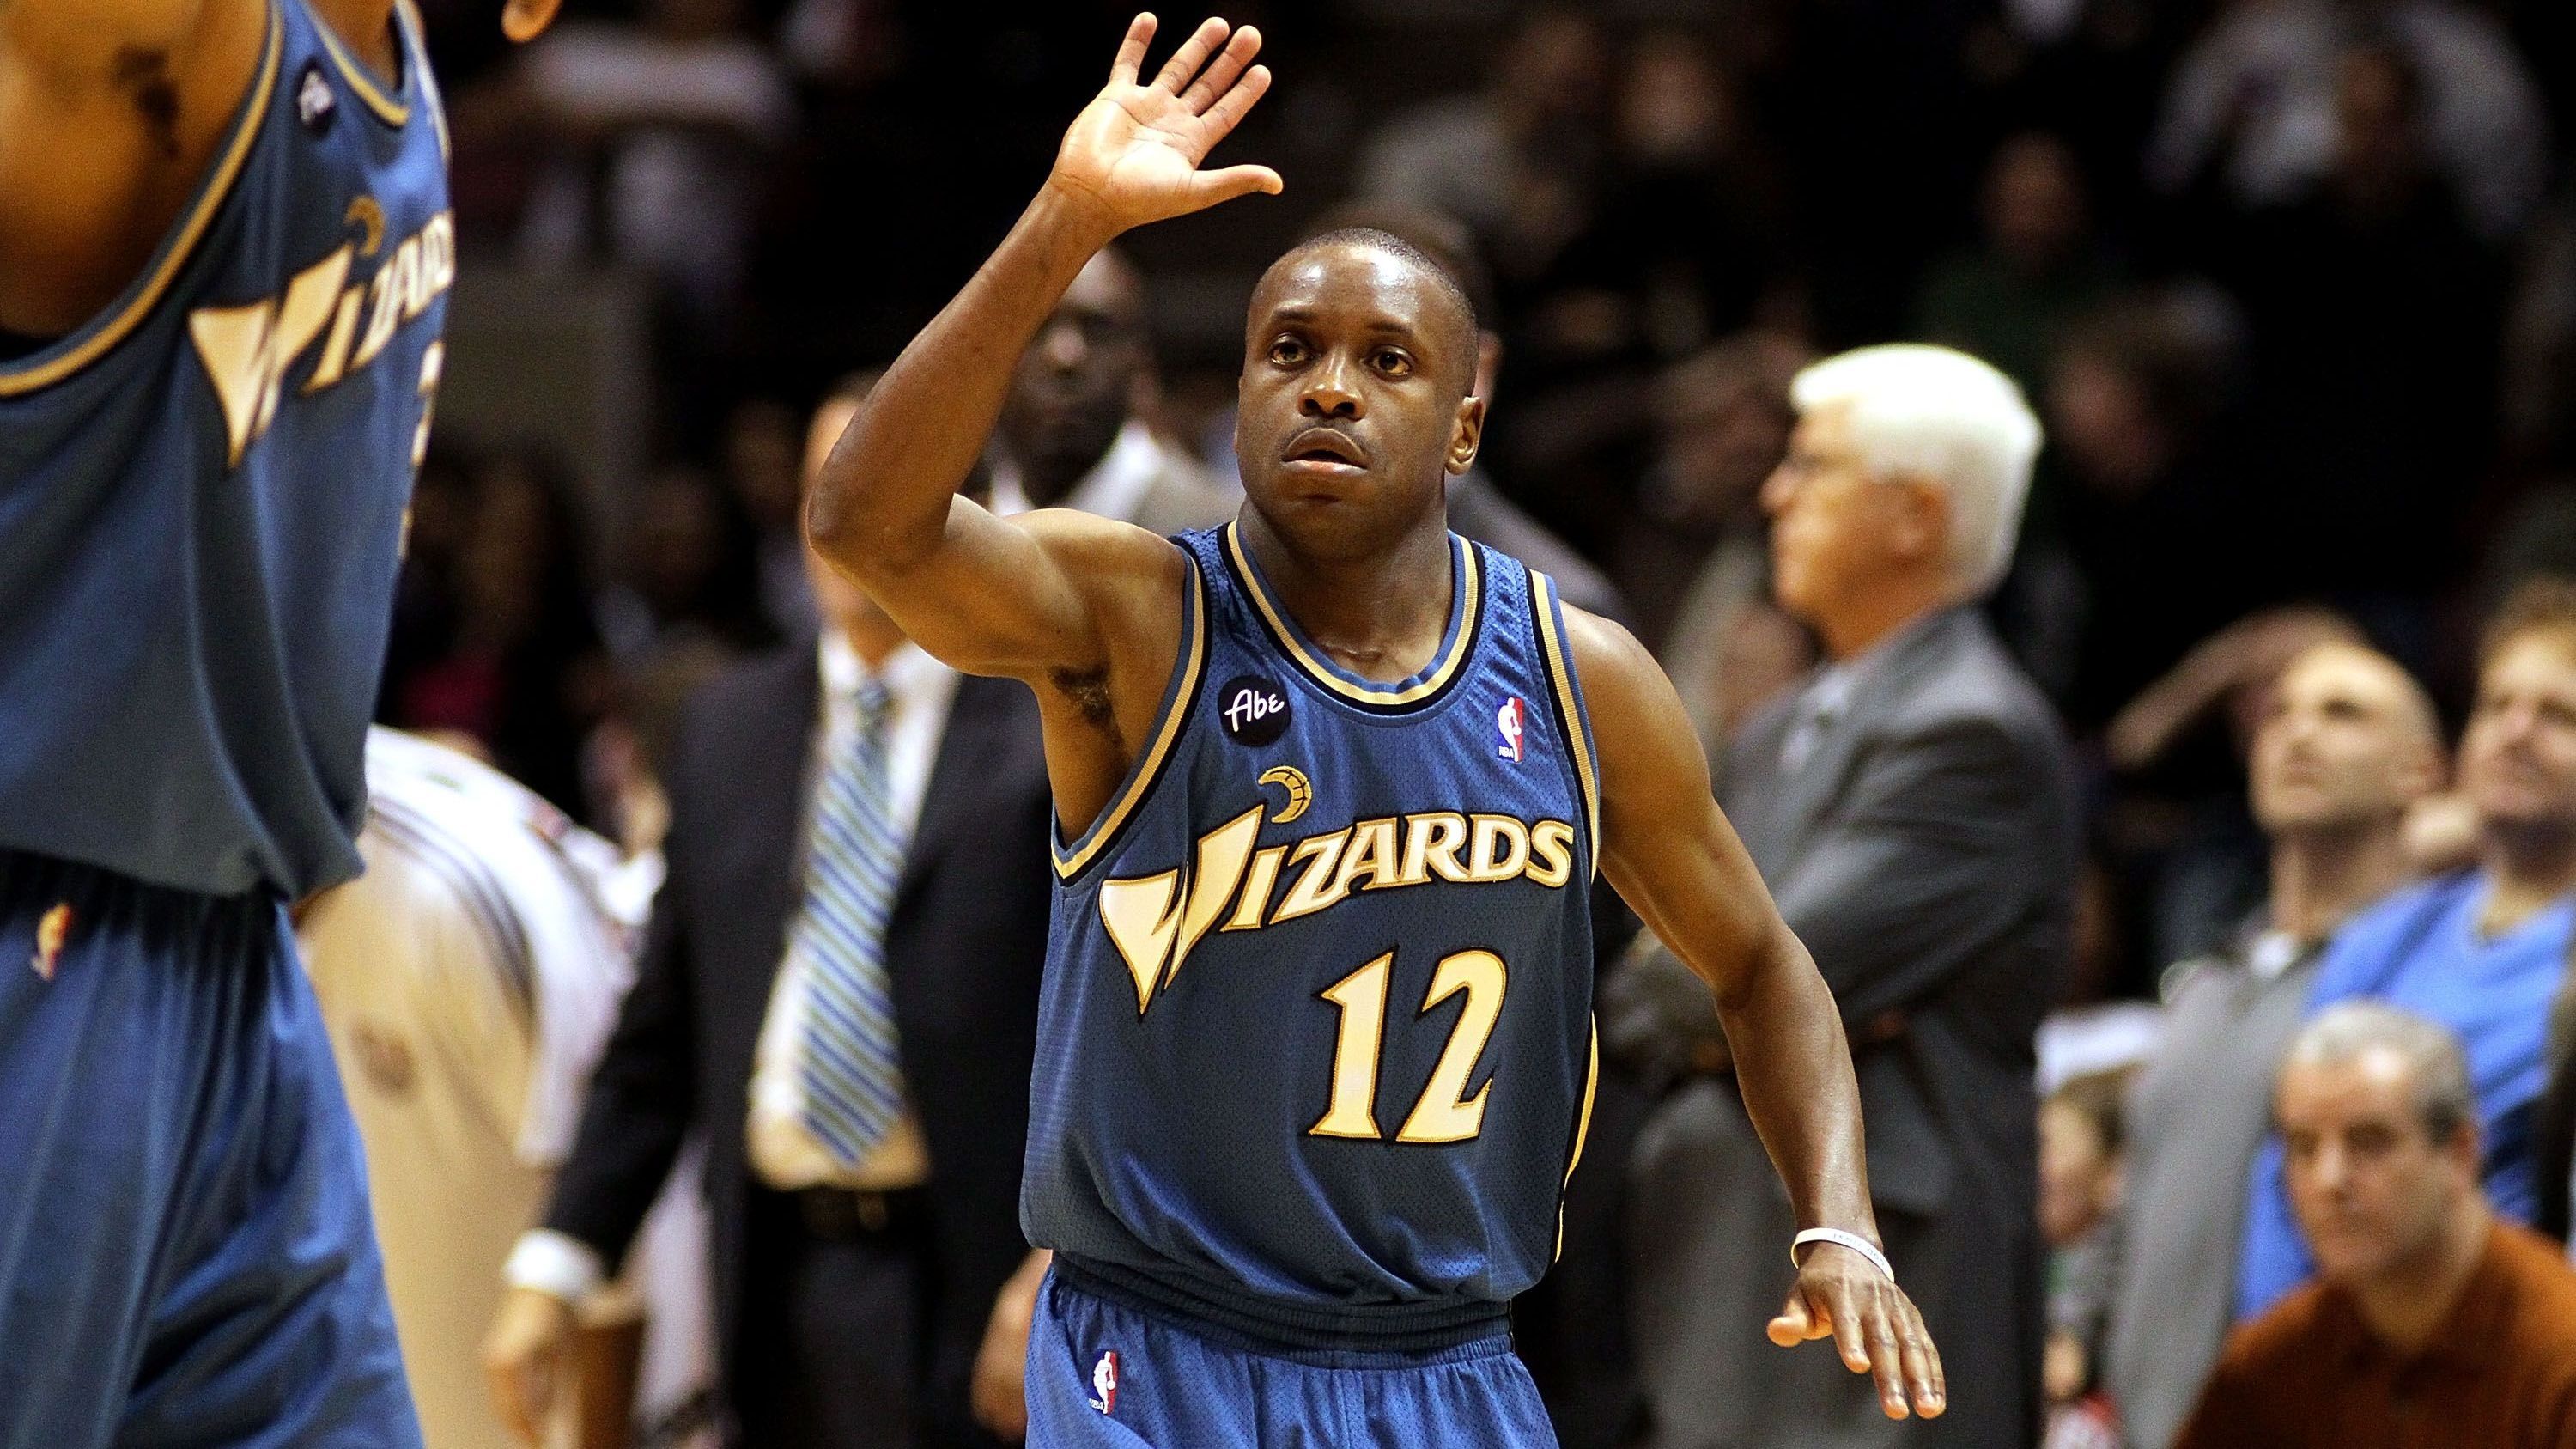 <strong>Earl Boykins - 1,65m</strong><br><strong>Teams:</strong> New Jersey Nets, Cleveland Cavaliers, Orlando Magic, Los Angeles Clippers, Golden State Warriors, Denver Nuggets, Milwaukee Bucks, Charlotte Hornets, Washington Wizards, Houston Rockets <br><strong>Karriere-Stats:</strong> 8,9 Punkte, 1,3 Rebounds, 3,2 Assists<br><strong>Auszeichnungen:</strong> -